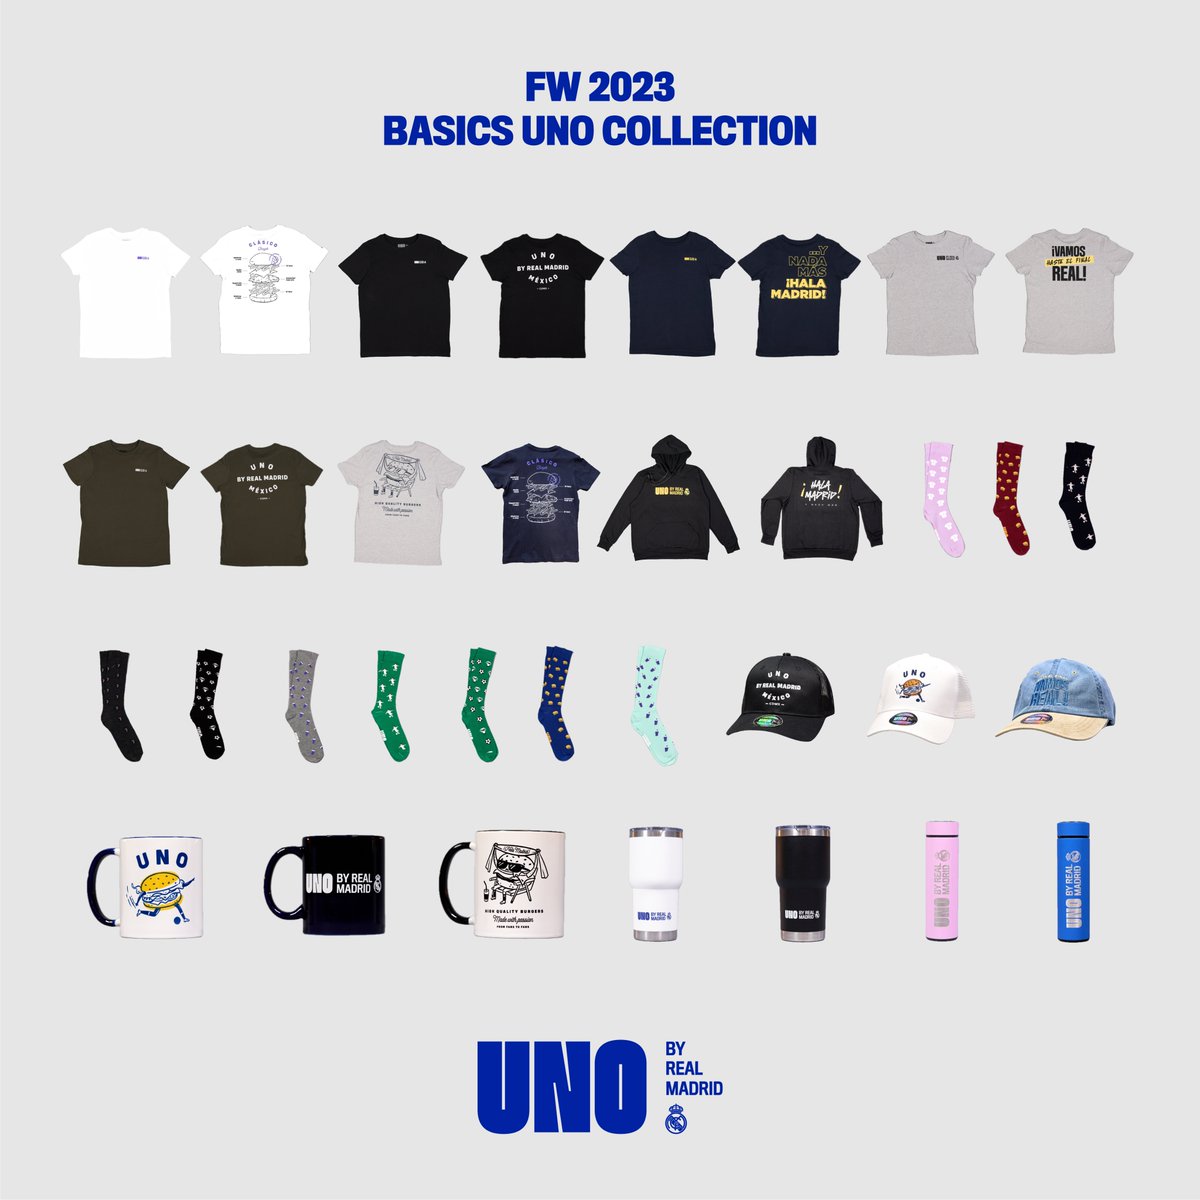 Basics UNO collection is available now in store.
#HungryForMore